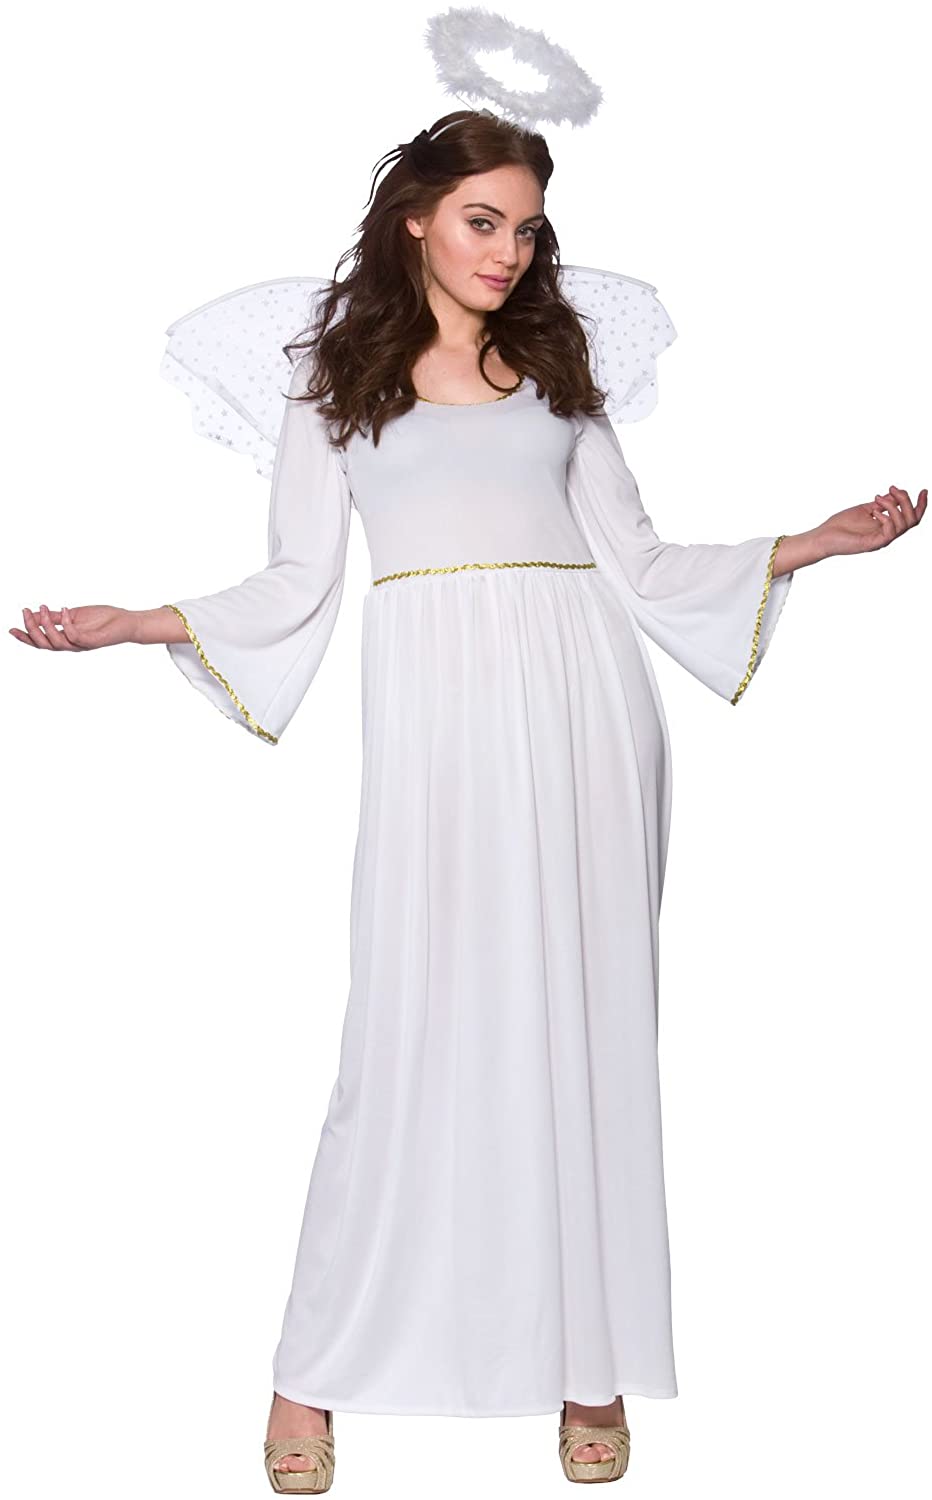 White Angel Ladies Fancy Dress Christmas Party Costume Dress Halo ...